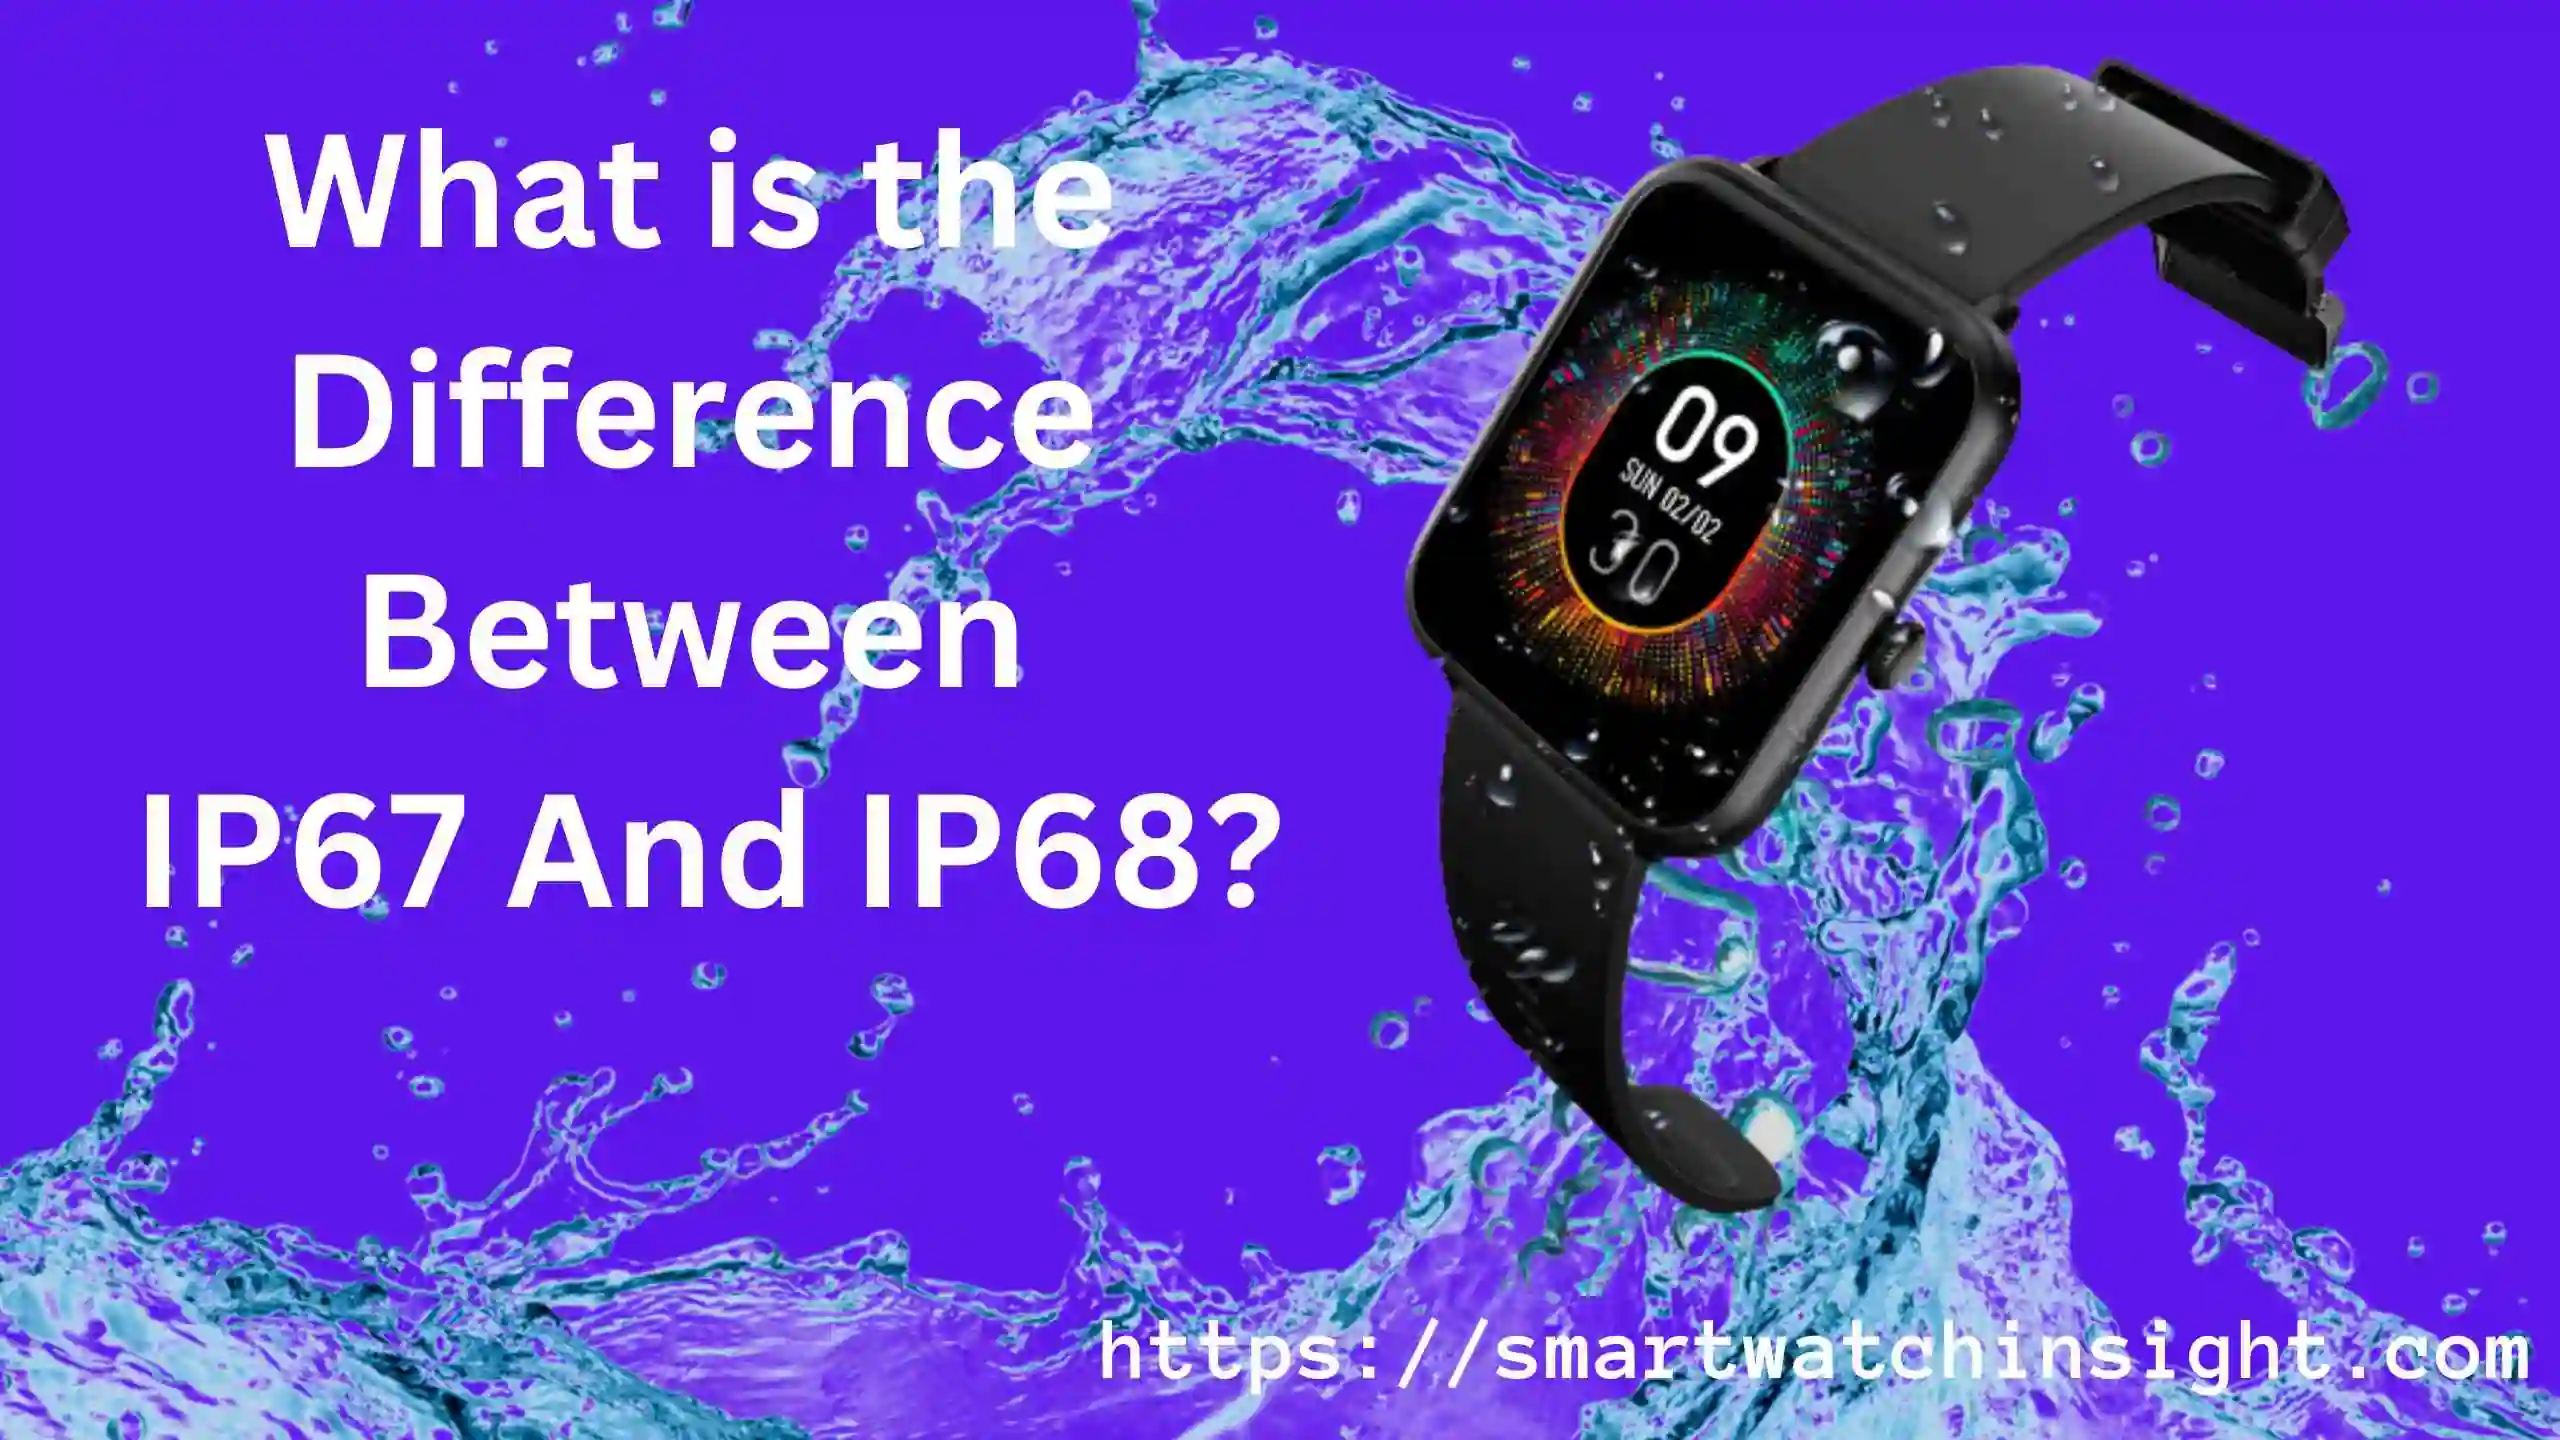 What is the Difference Between IP67 And IP68